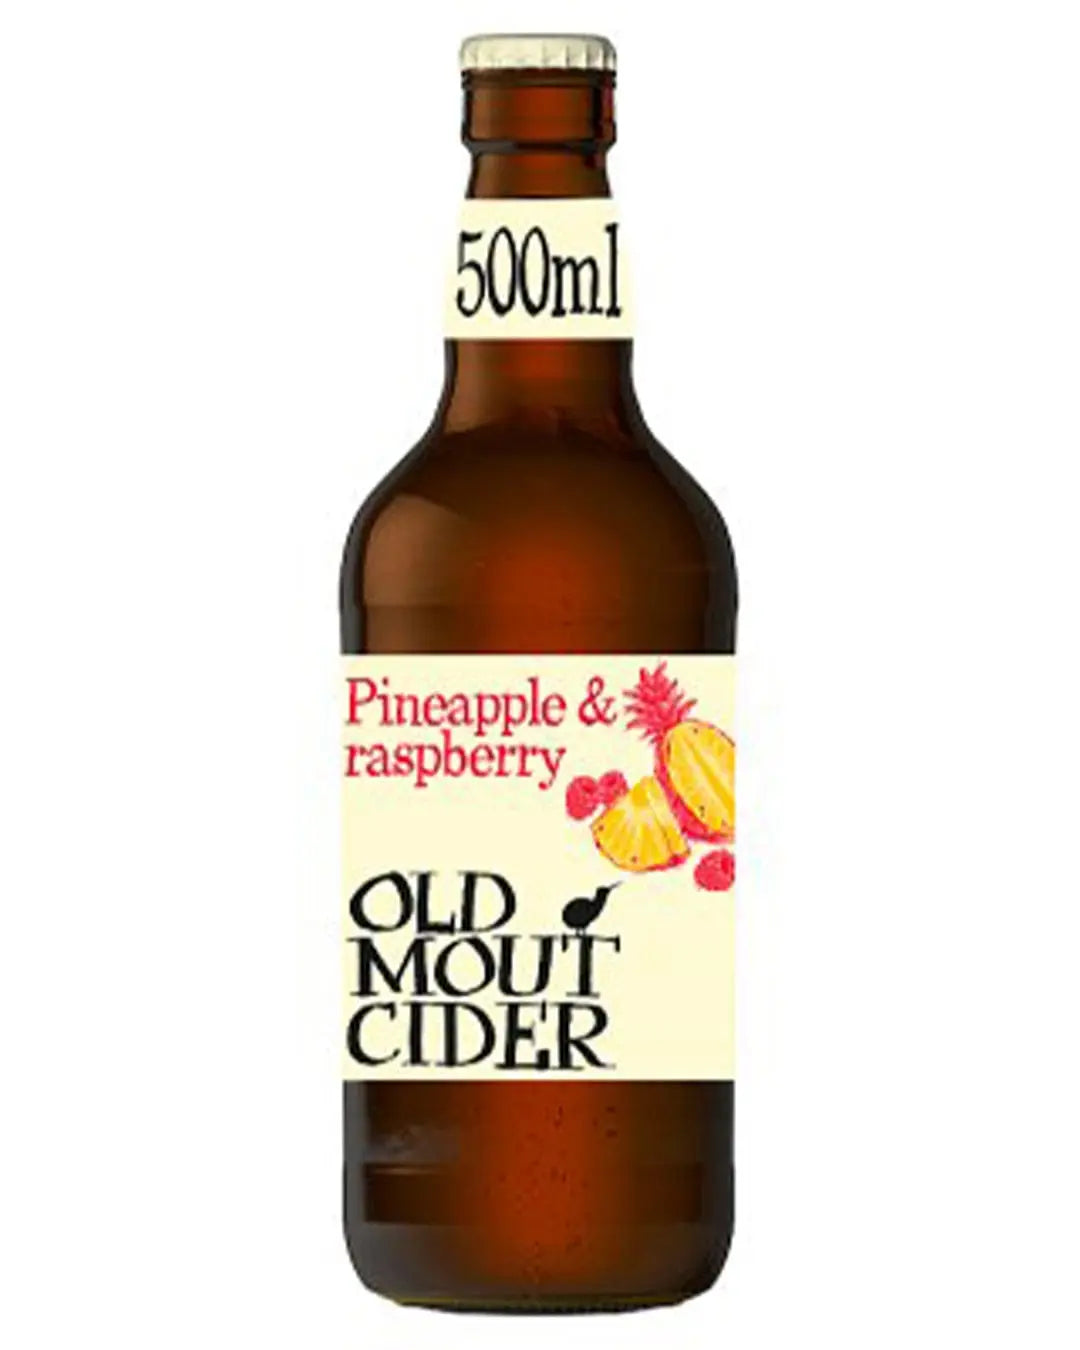 Old Mout Pineapple & Raspberry Cider, 500 ml Cider